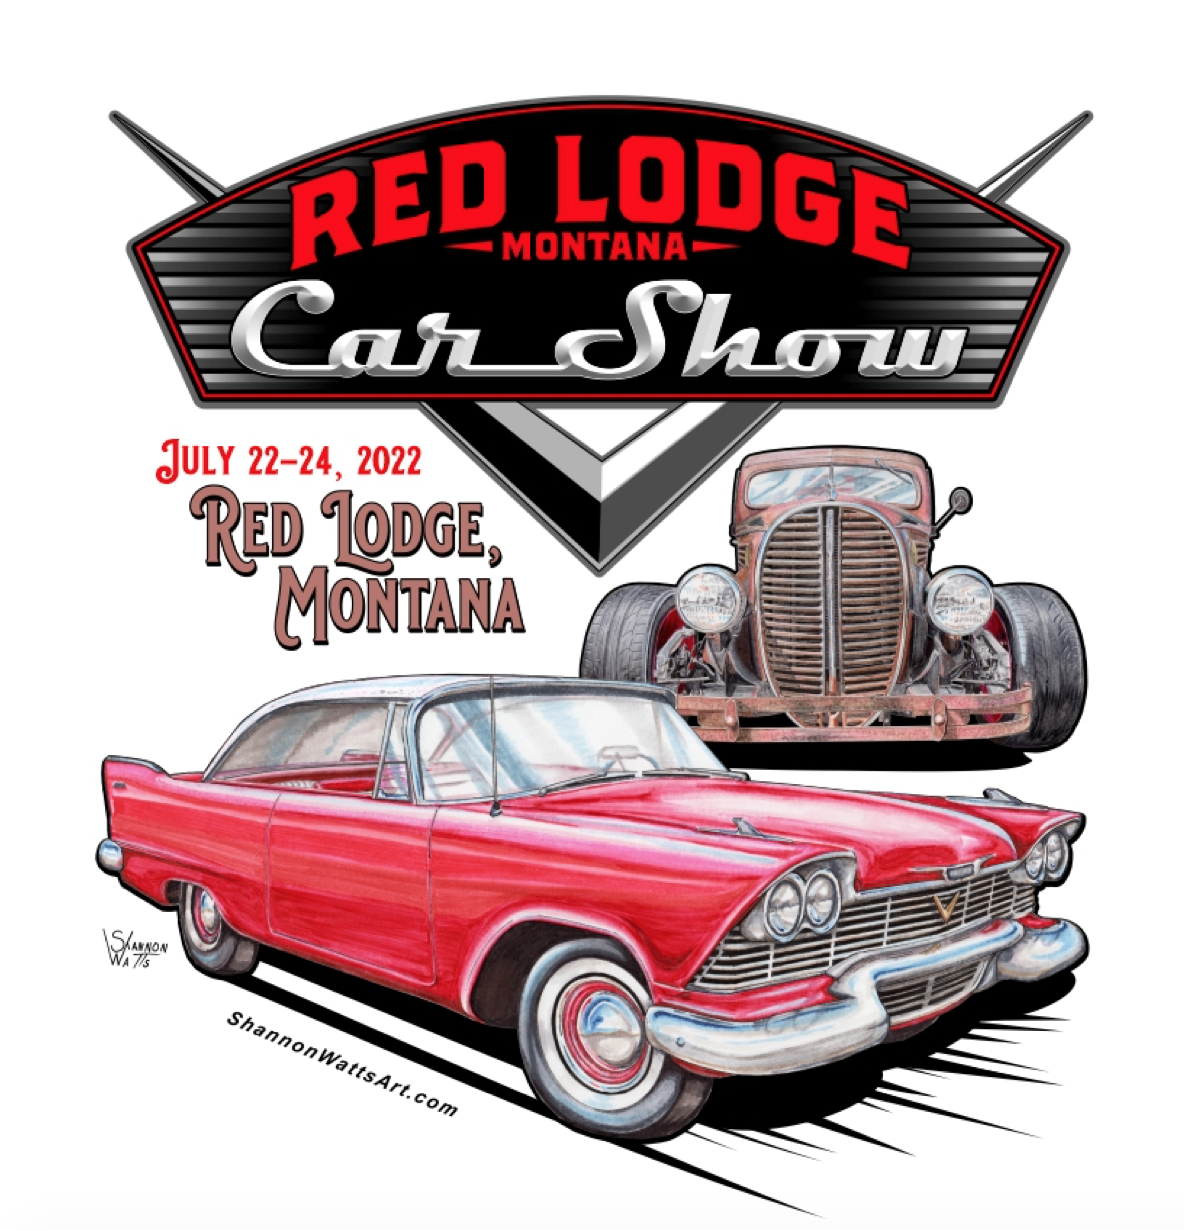 Mountain Outlaw magazine: Visit Red Lodge